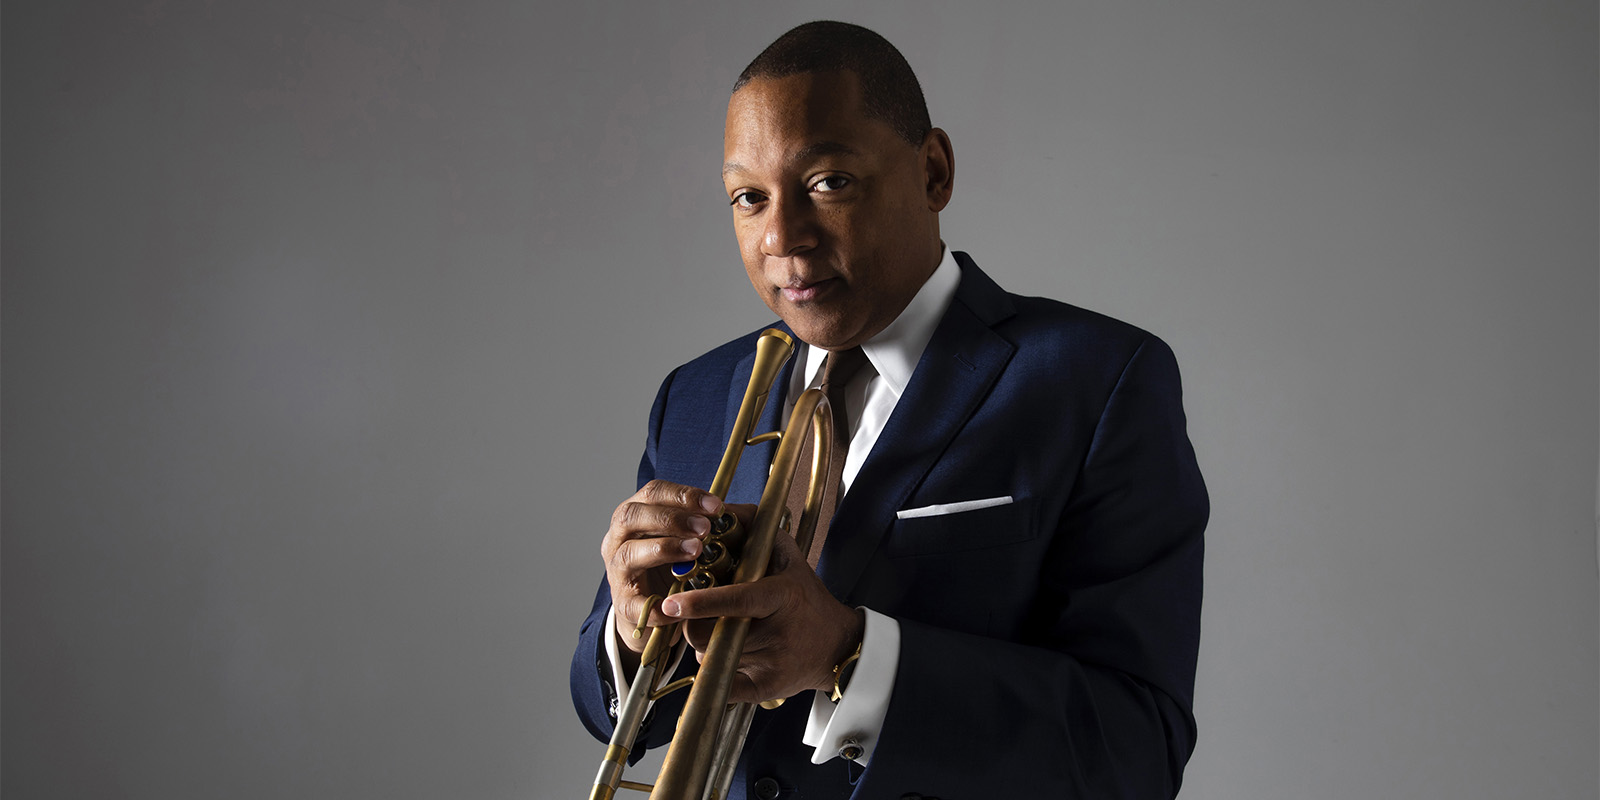 Wynton Marsalis, Peachtree String Quartet, Chamber Music Society of Lincoln Center Featured in October